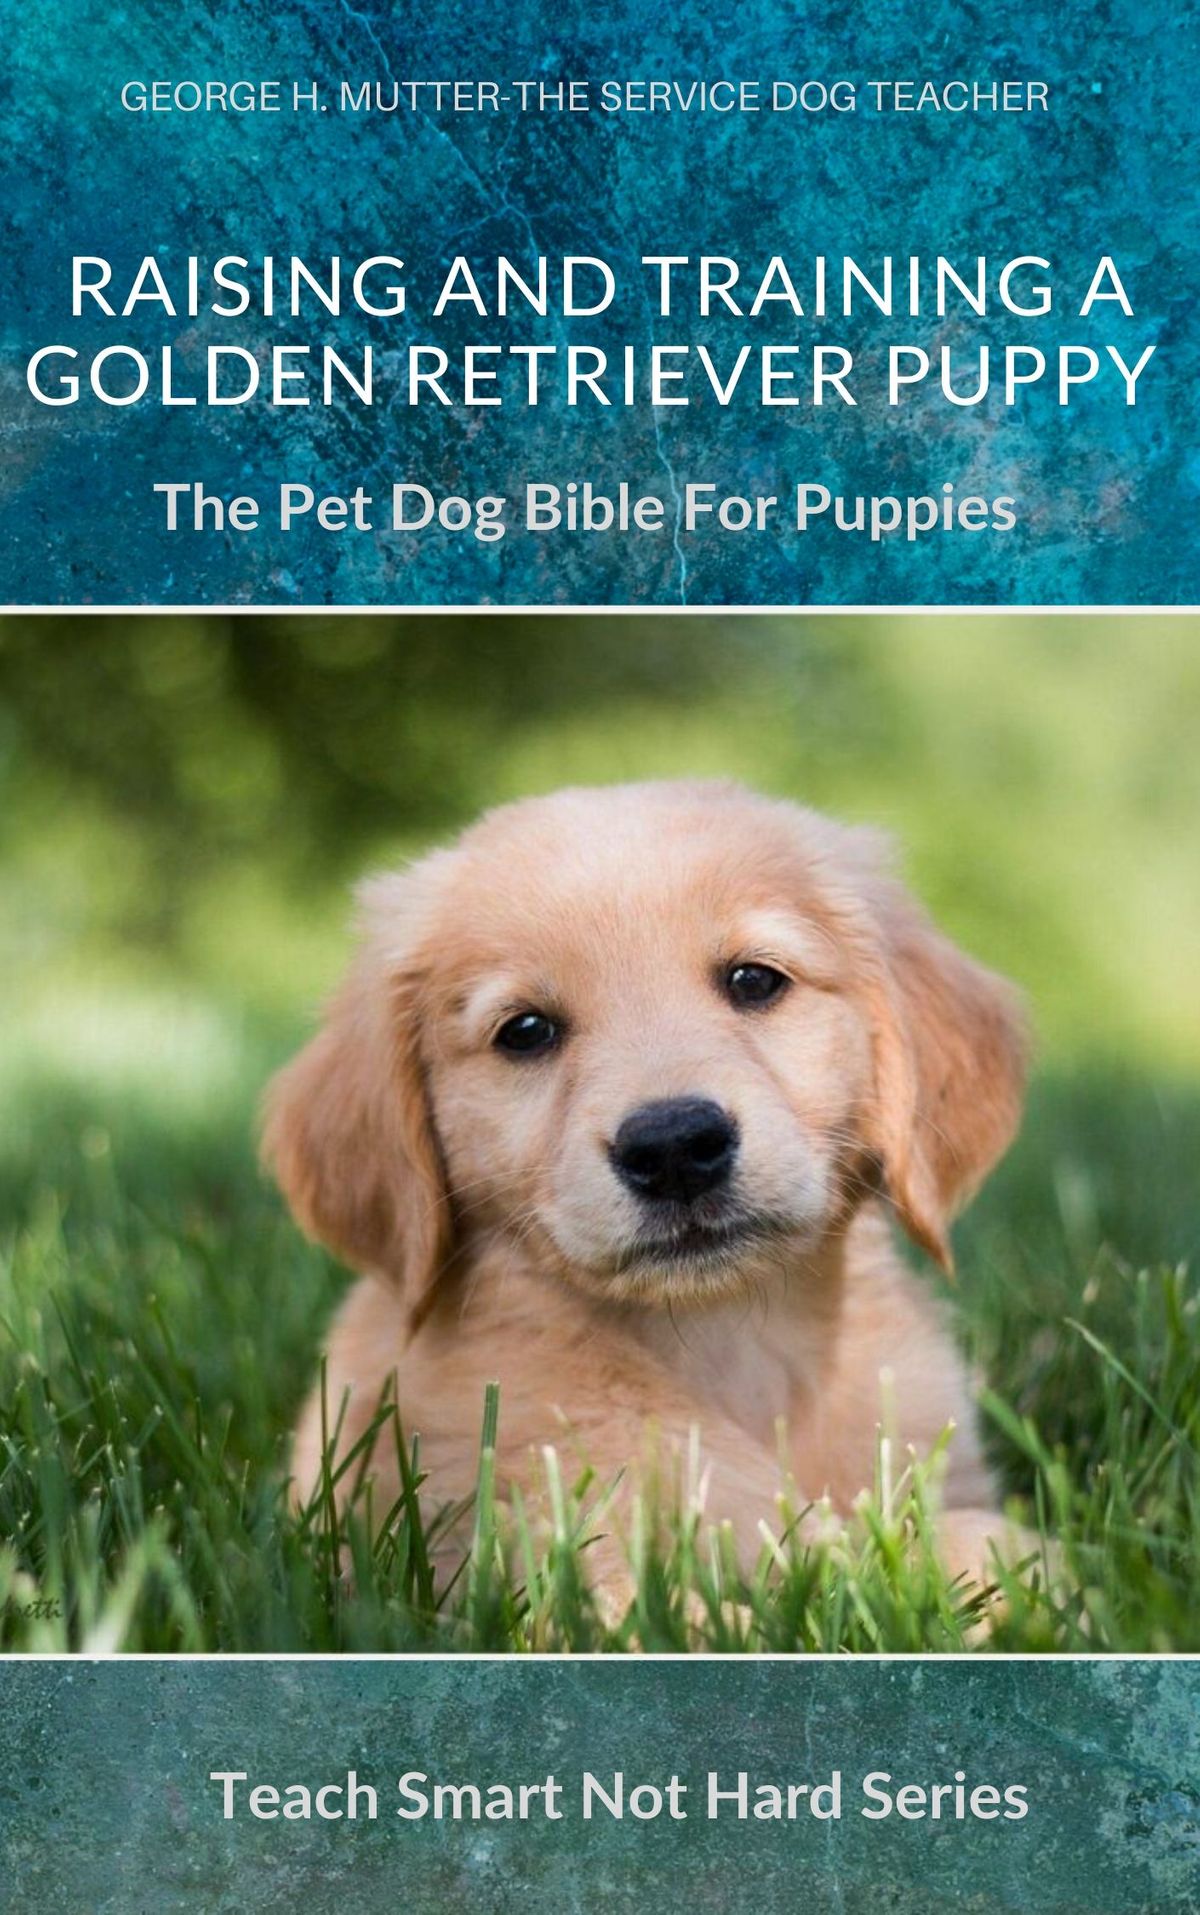 Raising And Training A Golden Retriever Puppy eBook by ...